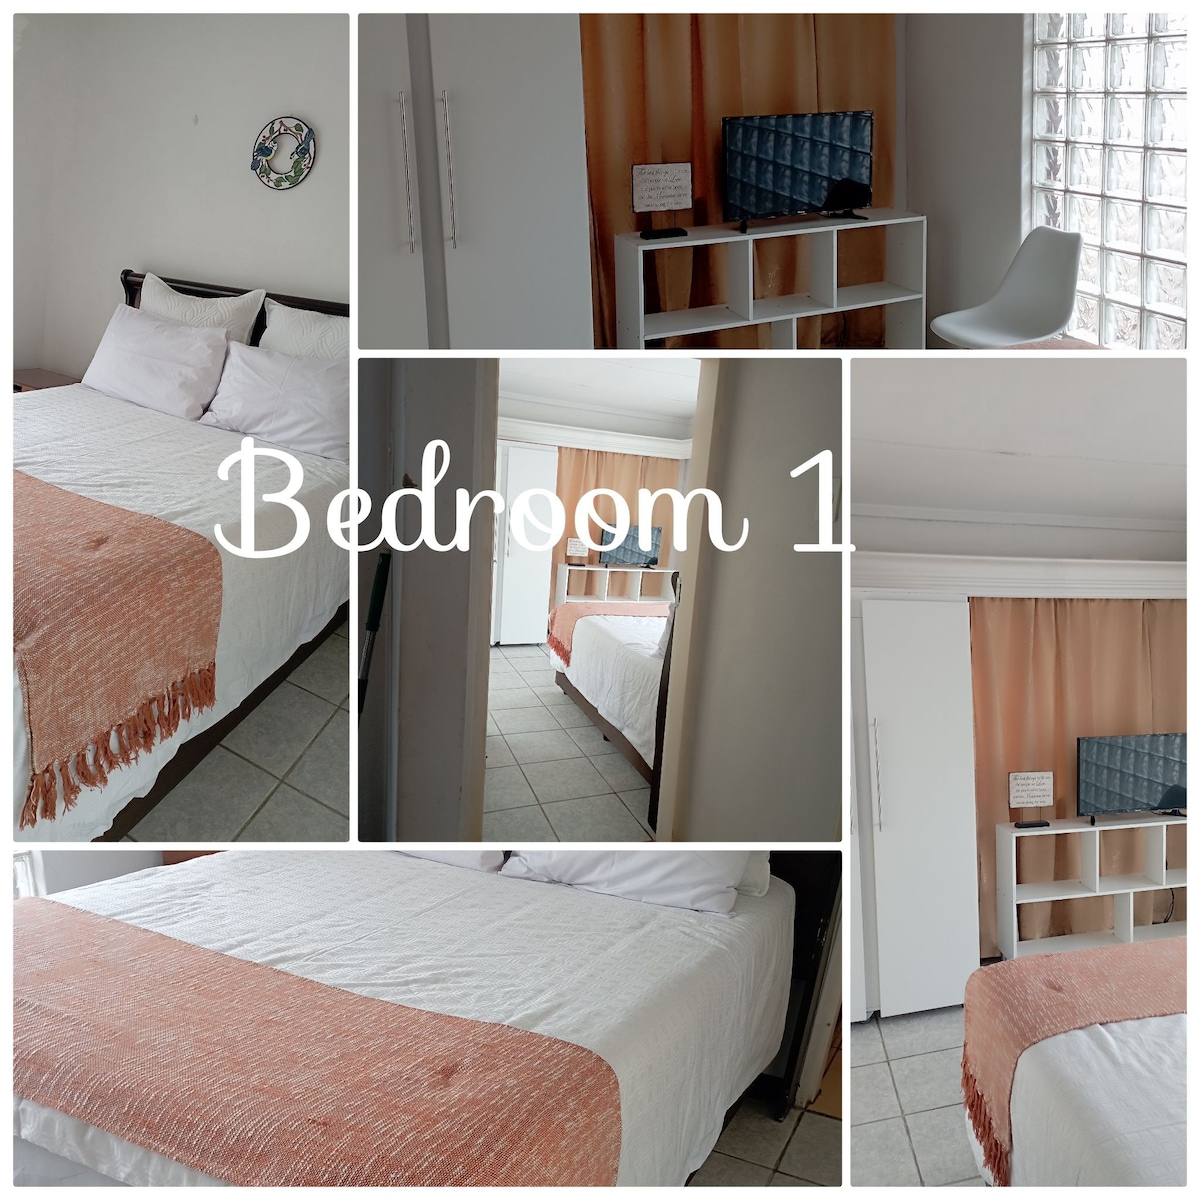 Yakhe self-catering Cozy styled 1 bedroomed